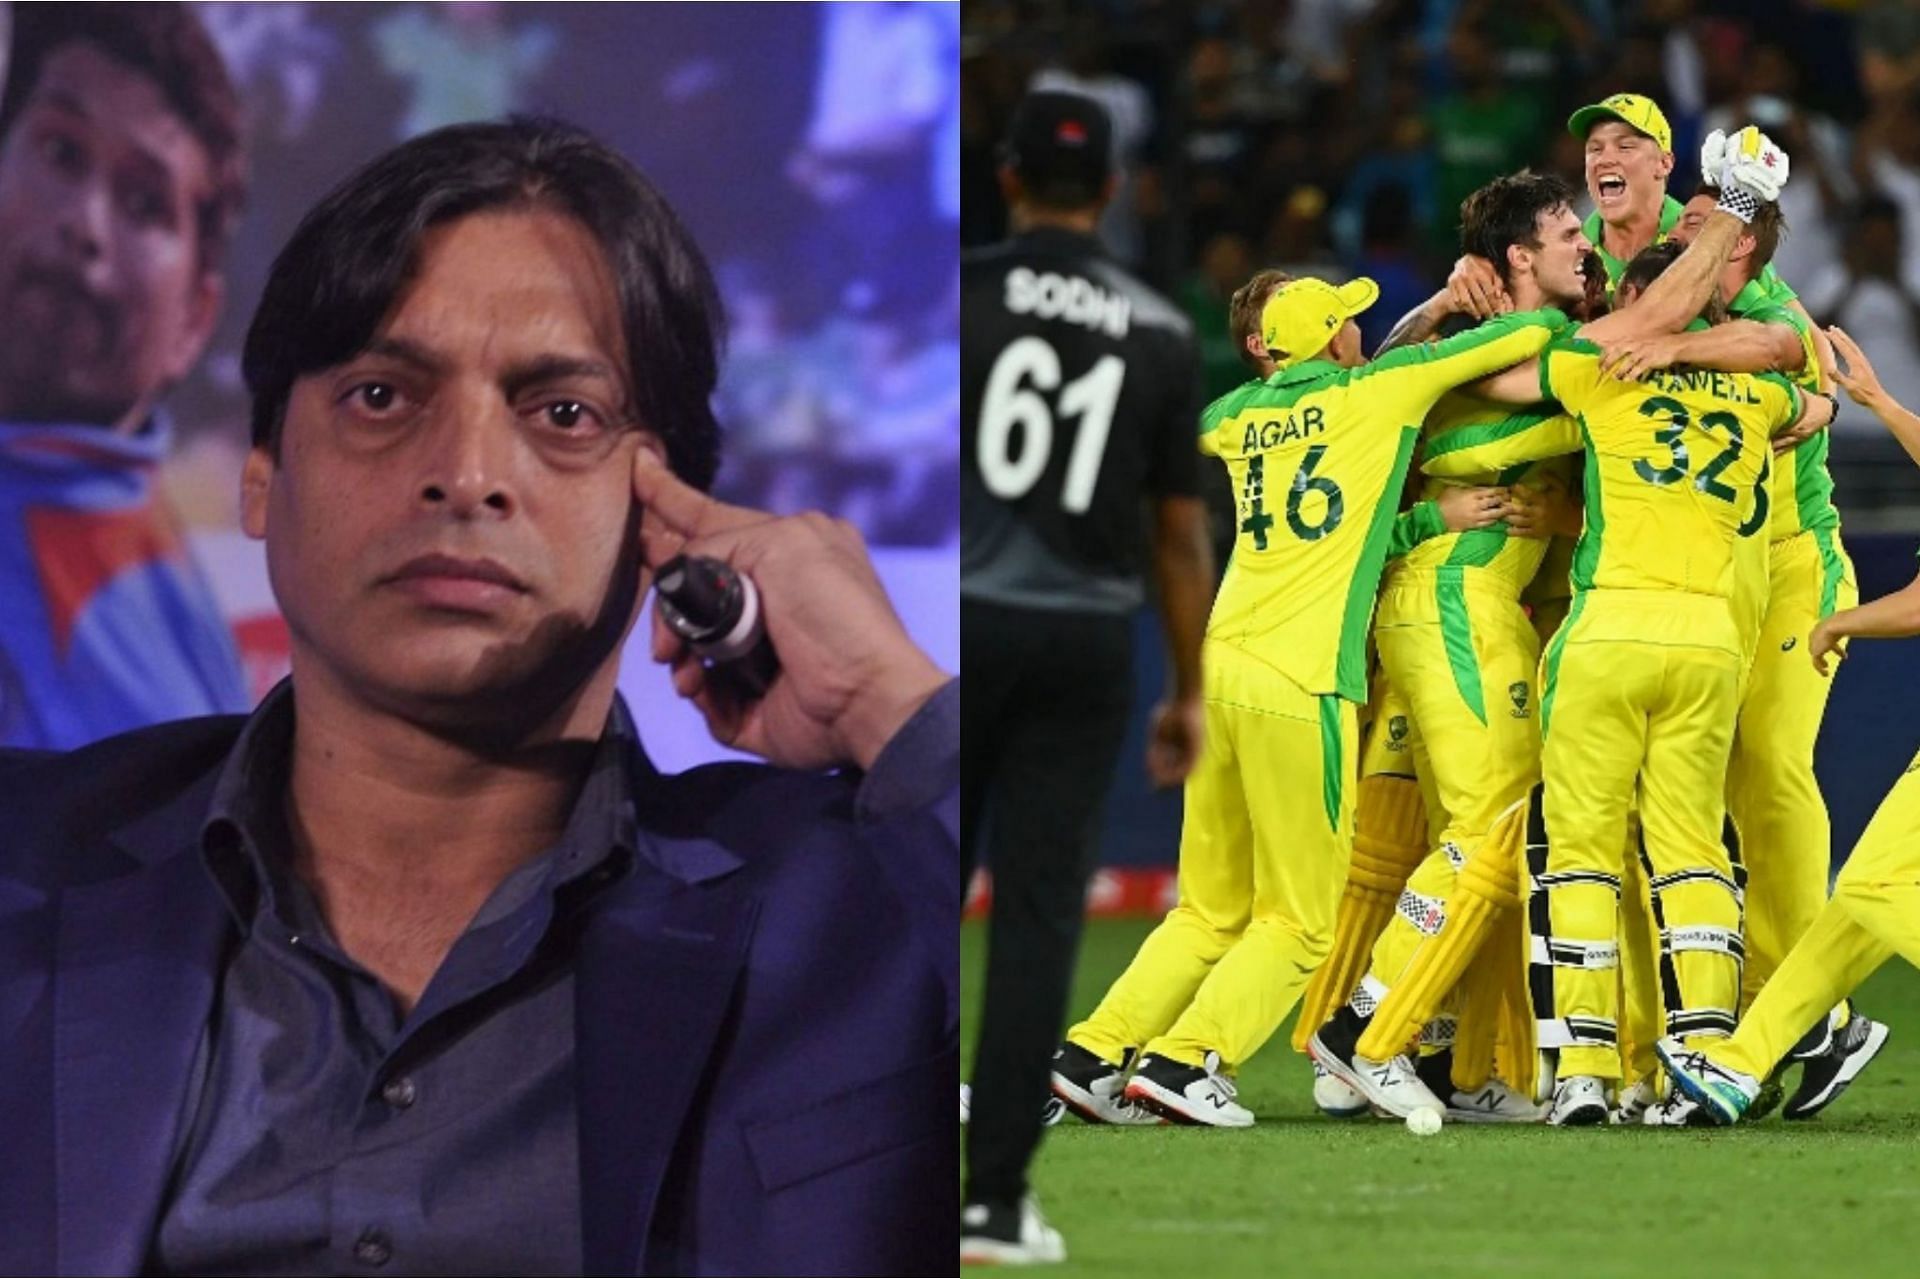 Shoaib Akhtar believes that Australia outclassed New Zealand in the T20 World Cup 2021 finals